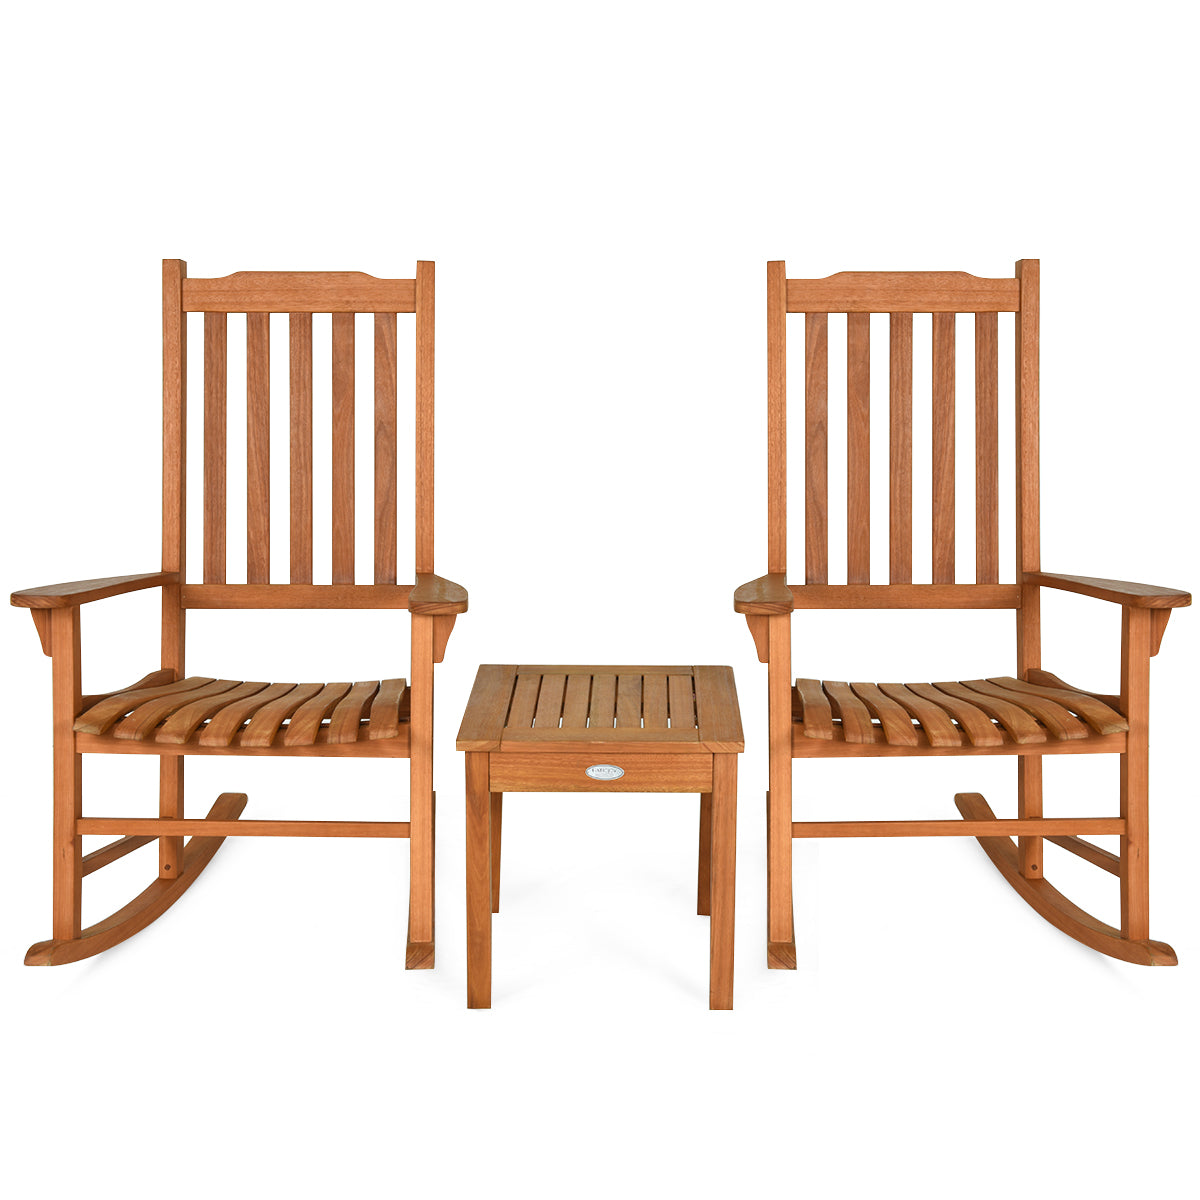 Rocking Chair 3 Piece Set Wooden W/ Two Wood Conversation Chairs and Accent Table